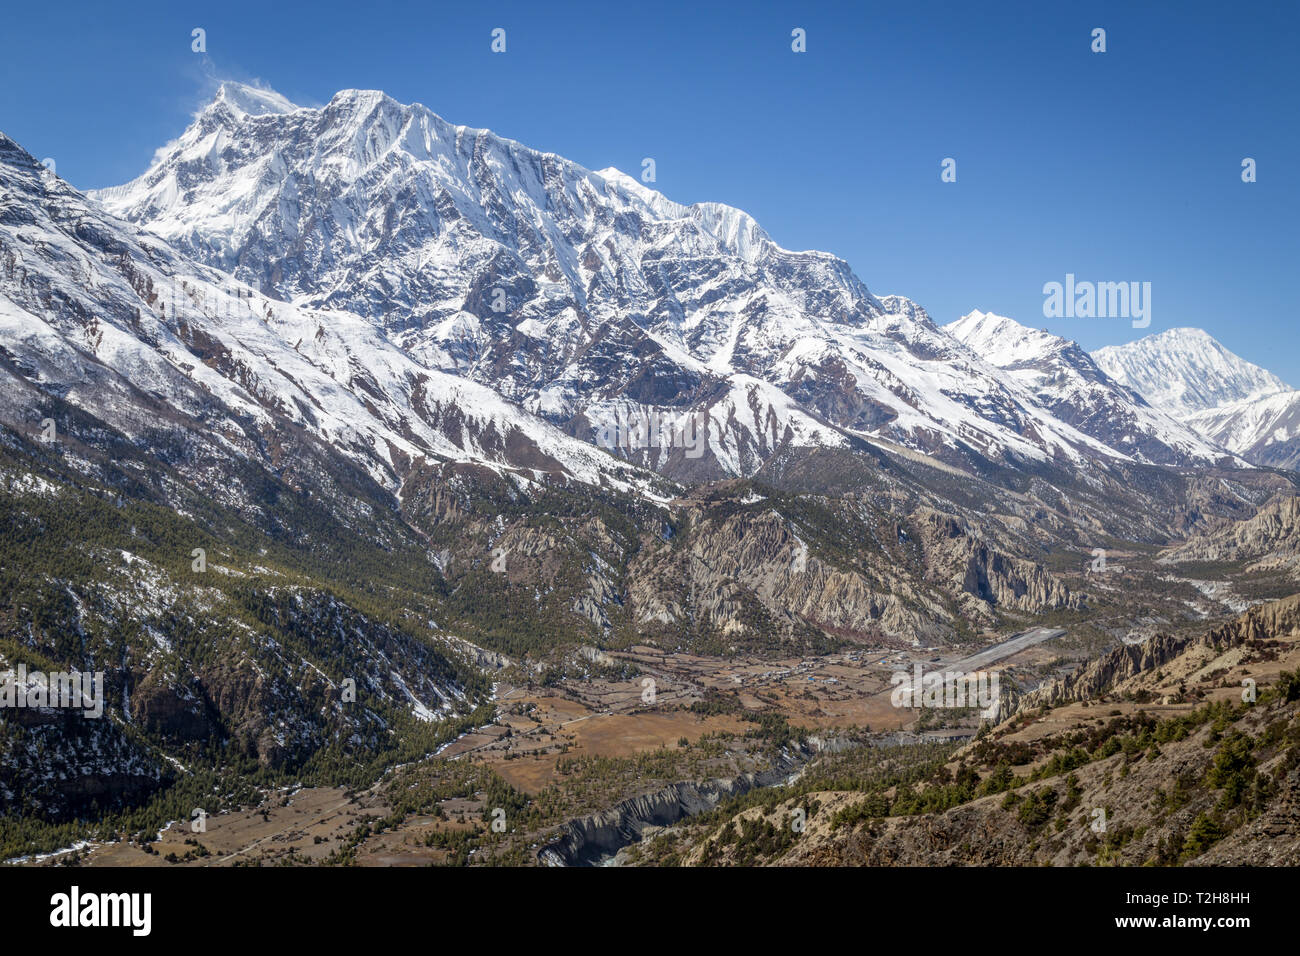 Manang, Nepal - October 28, 2014: View of a valley with the village Manang and the airport in the Annanpurna Conservation Area. Stock Photo